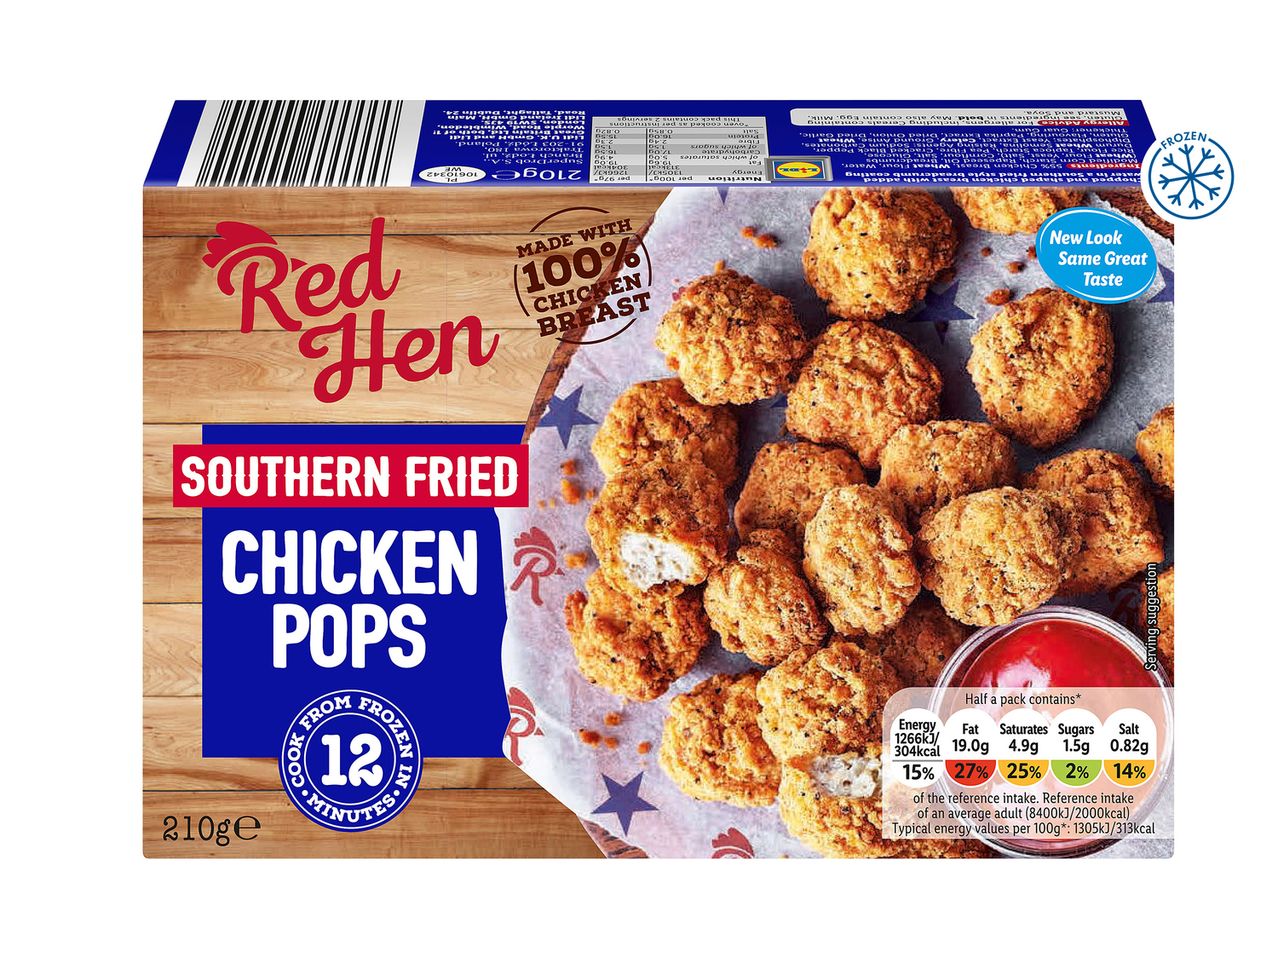 Go to full screen view: Red Hen Chicken Pops - Image 2